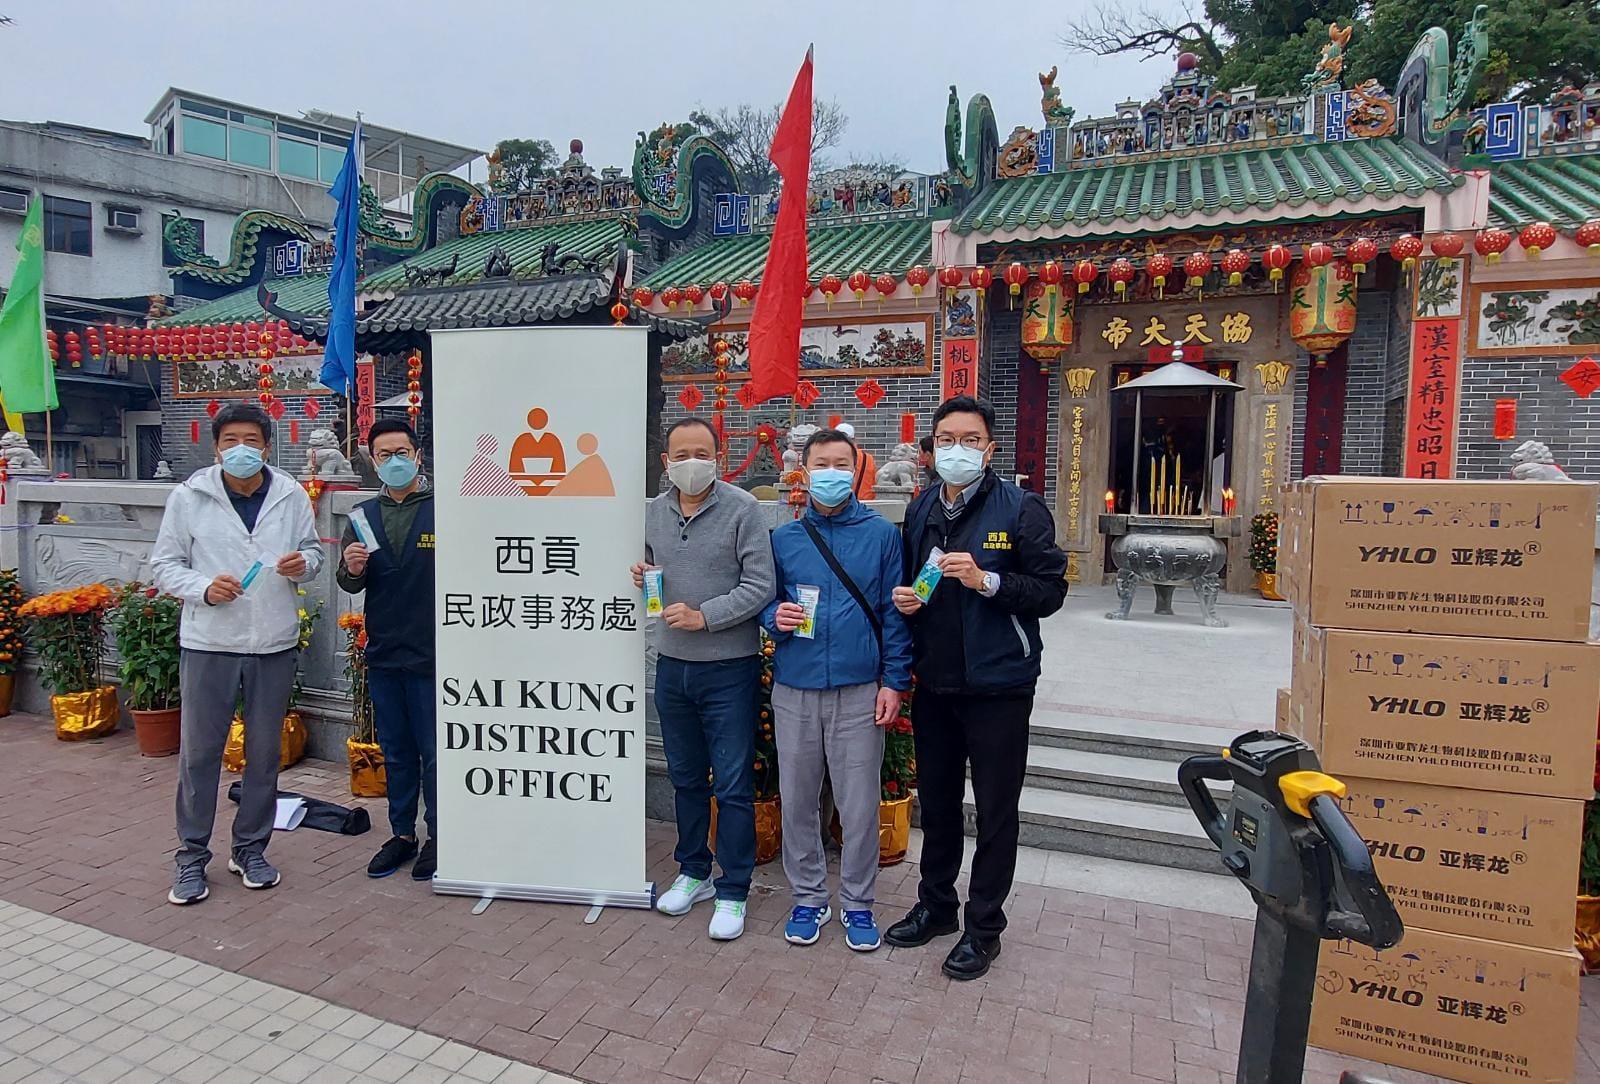 The Sai Kung District Office today (February 8), together with district bodies, distributed COVID-19 rapid test kits to households, cleansing workers and property management staff living and working in the area around Sai Kung Town Centre and Tui Min Hoi for voluntary testing.